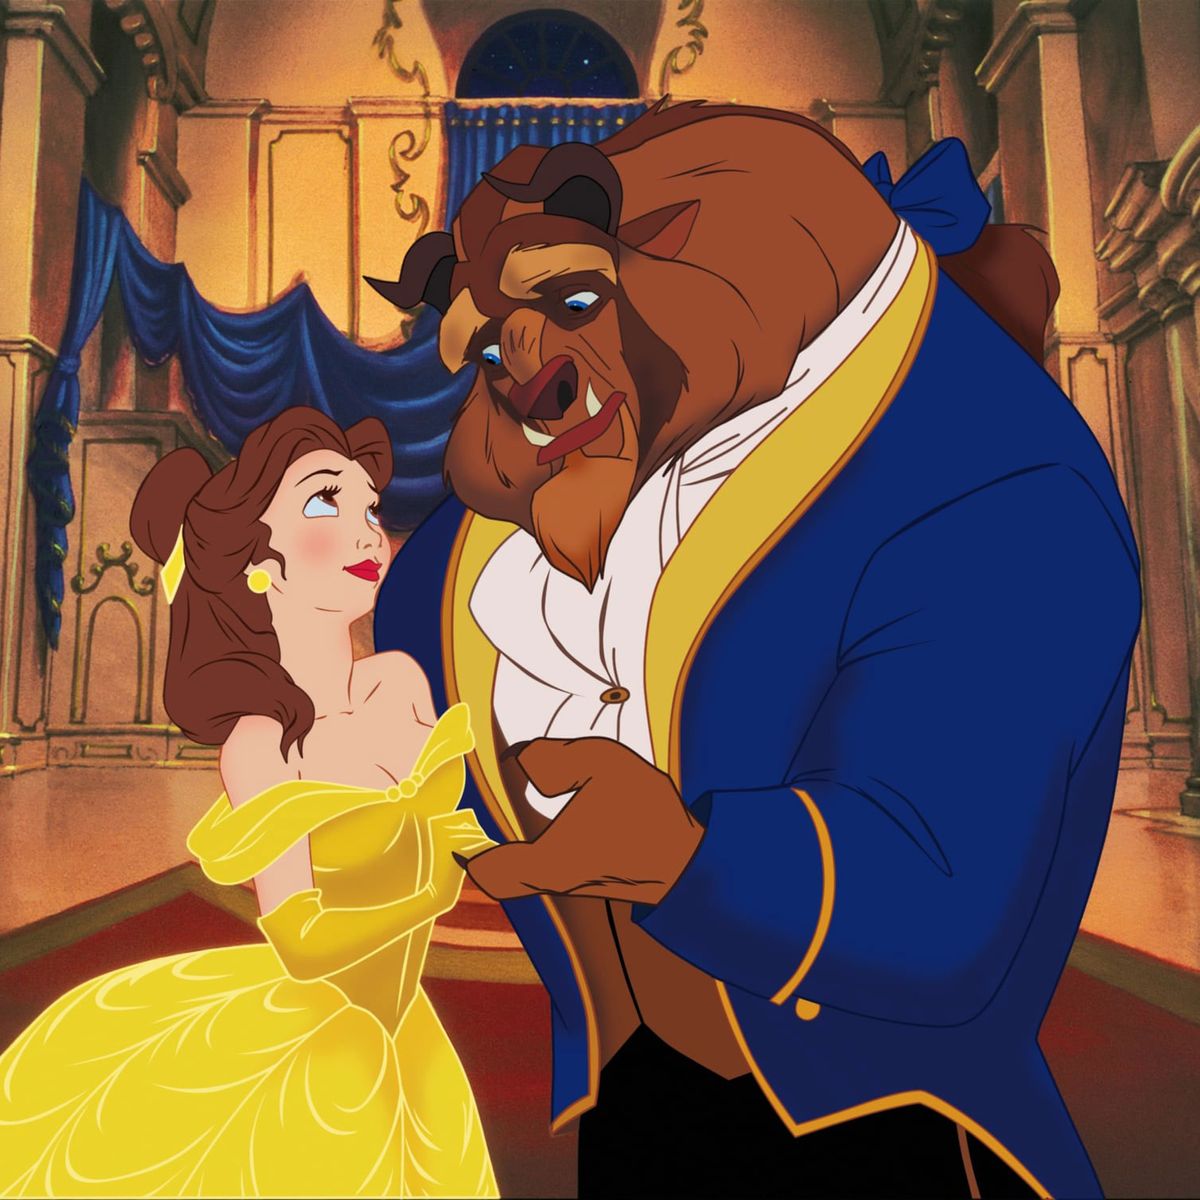 The Beauty and the Beast Screening That Changed Everything